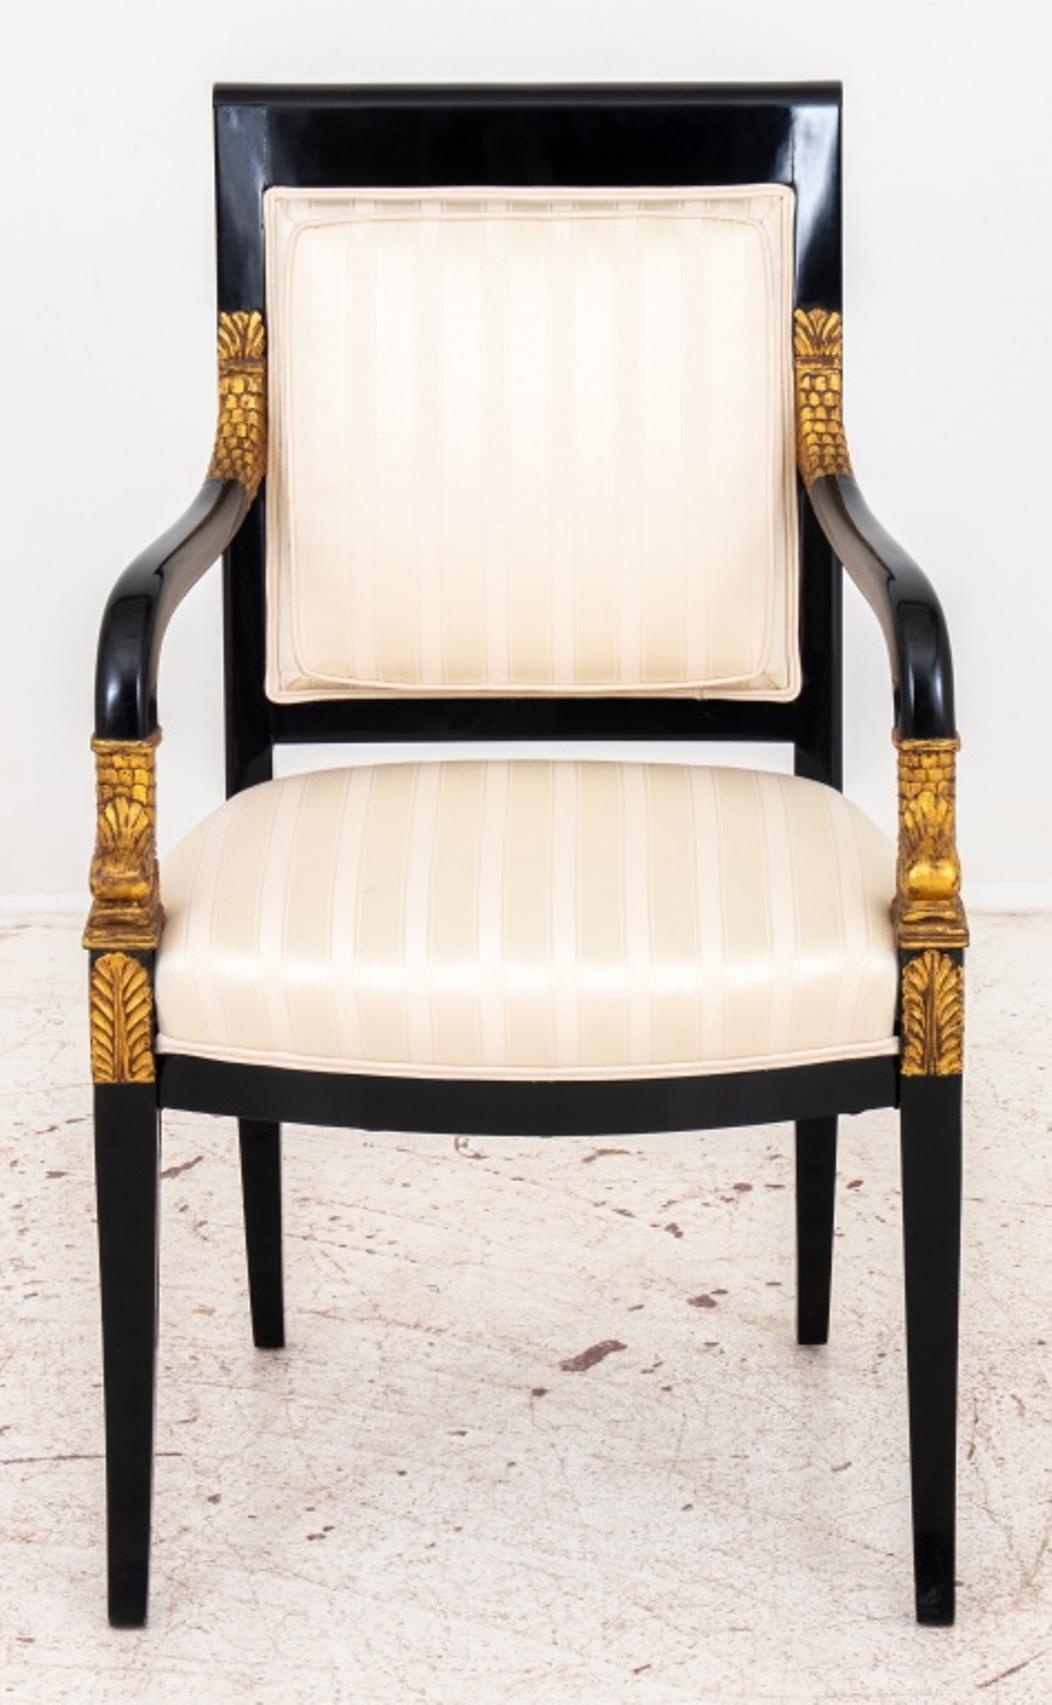 French Empire style ebonized wood armchair raised on saber legs, enhanced with gilt carved dolphin heads to arms, upholstered in cream fabric.

Dimensions: 37